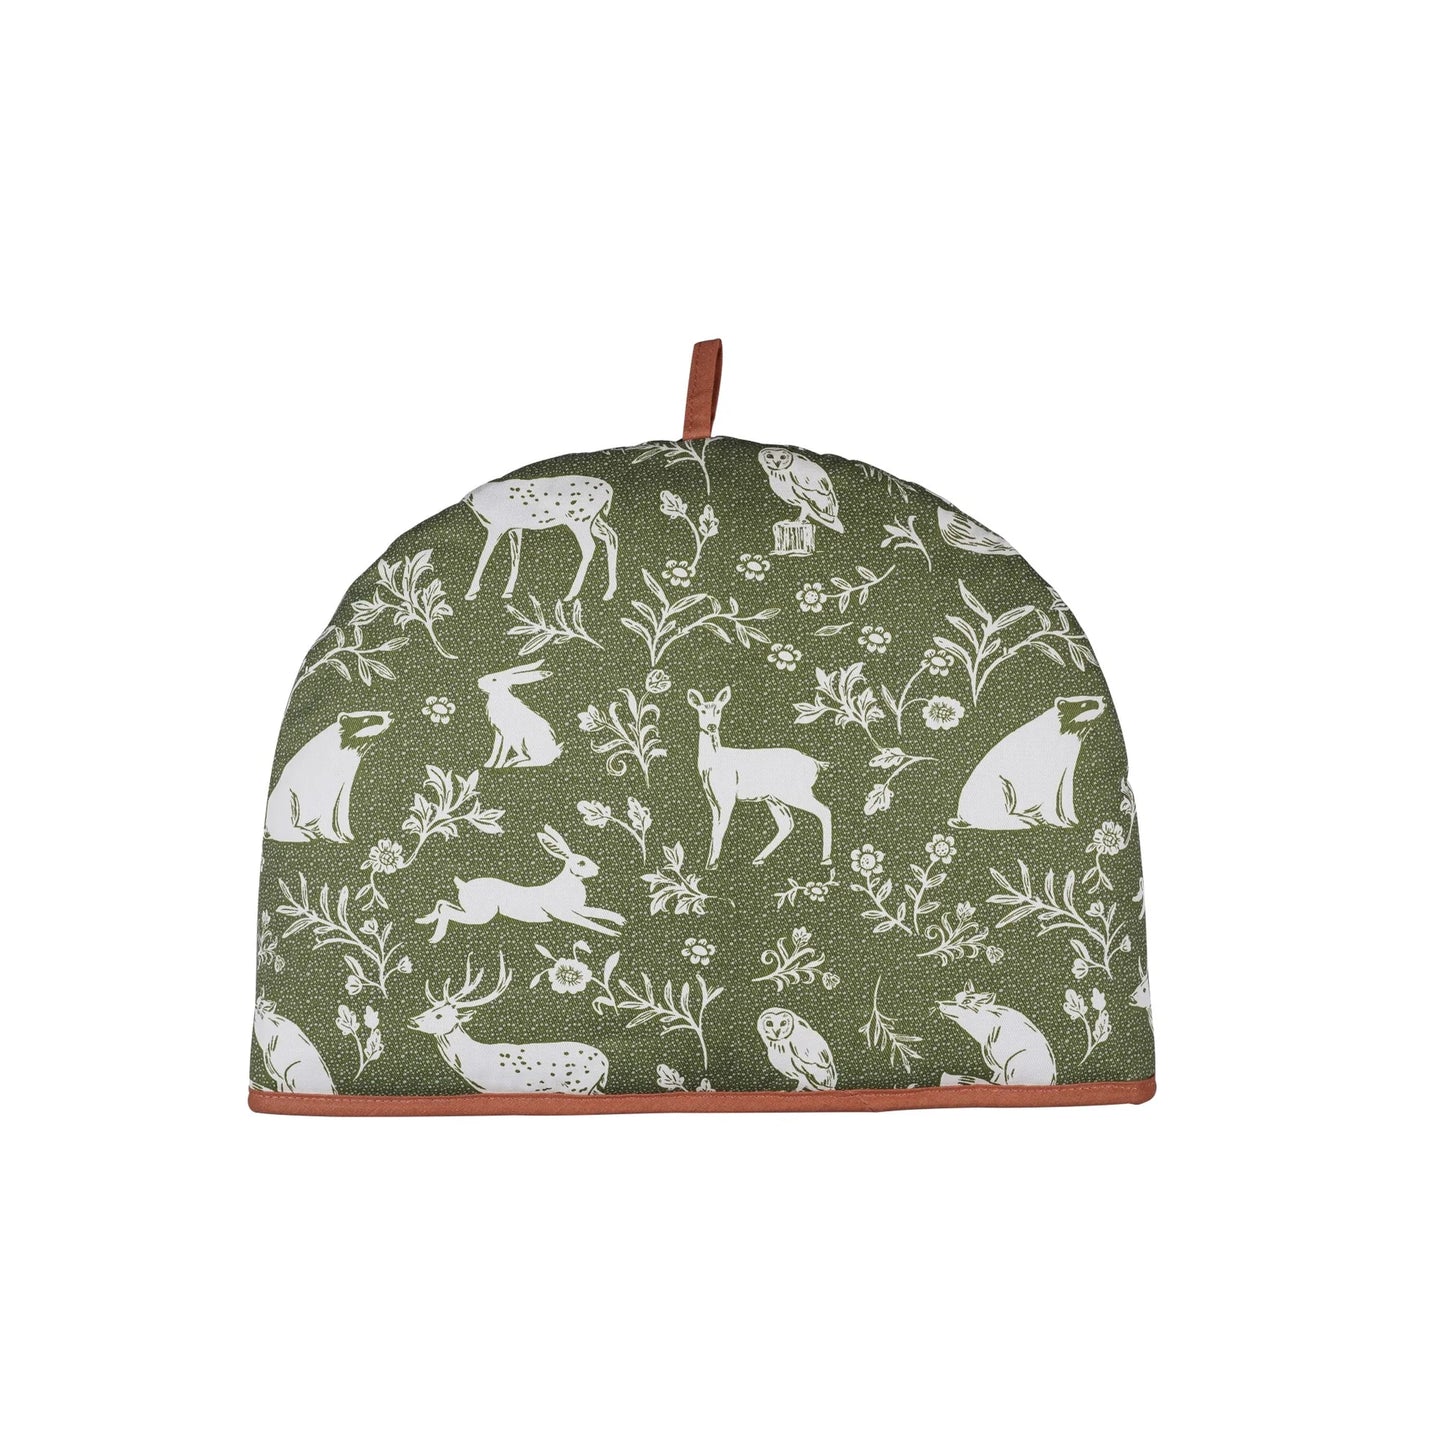 Tea Cosy "Forest Friends"